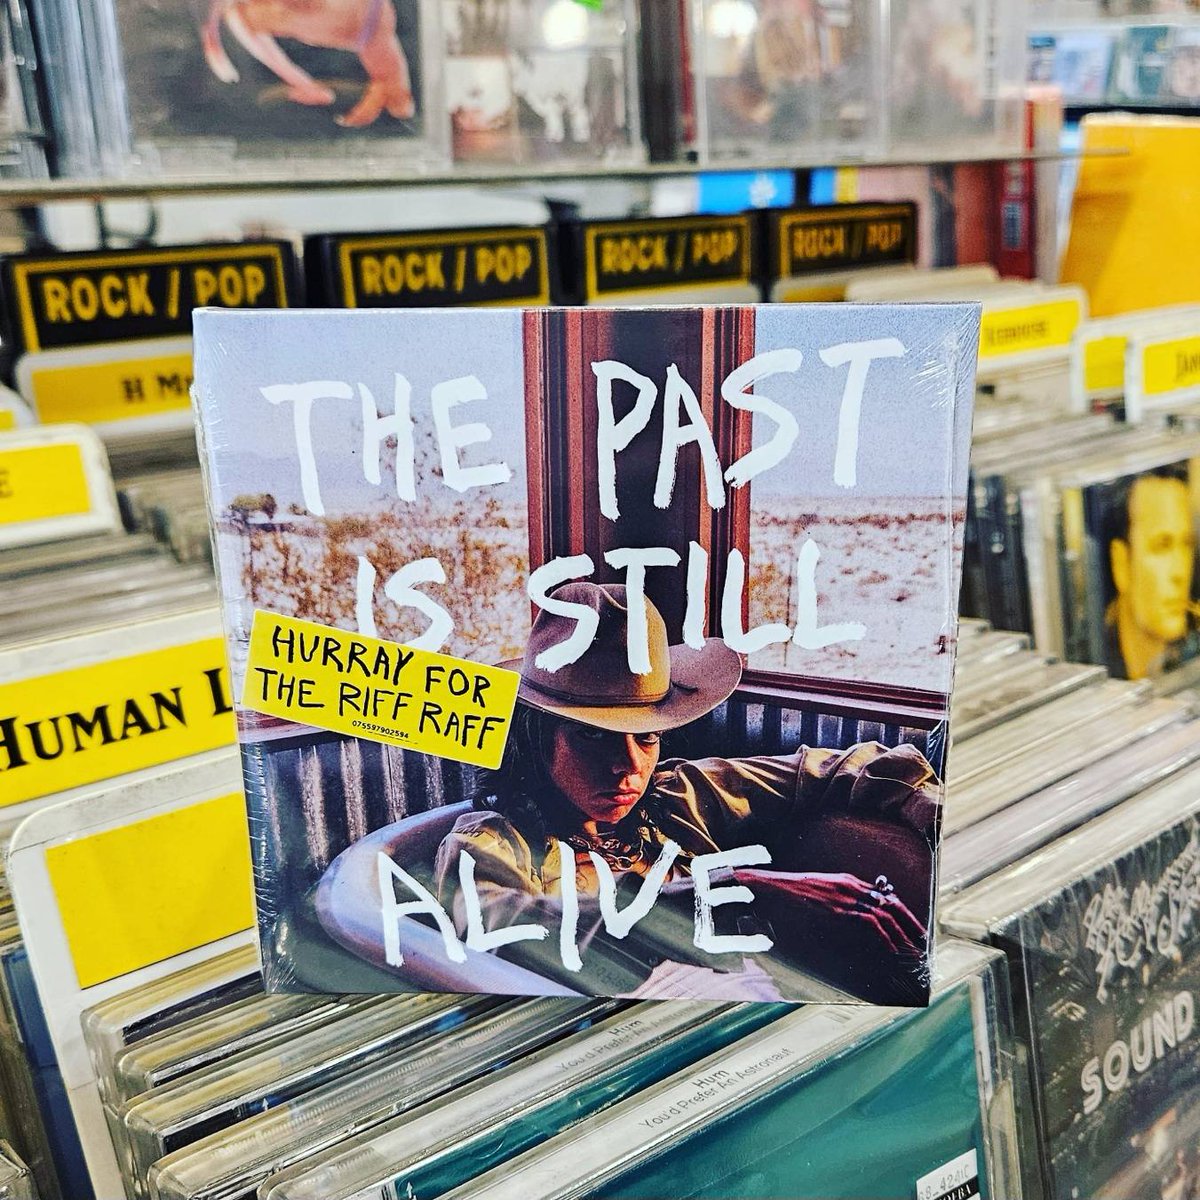 On 'The Past Is Still Alive,' Hurray For The Riff Raff (@HFTRR) weaves threads of hope, joy & love from the complications of the past and our messy present. It's out now on CD and vinyl via @NonesuchRecords. Get it here: bit.ly/3oZTpYB